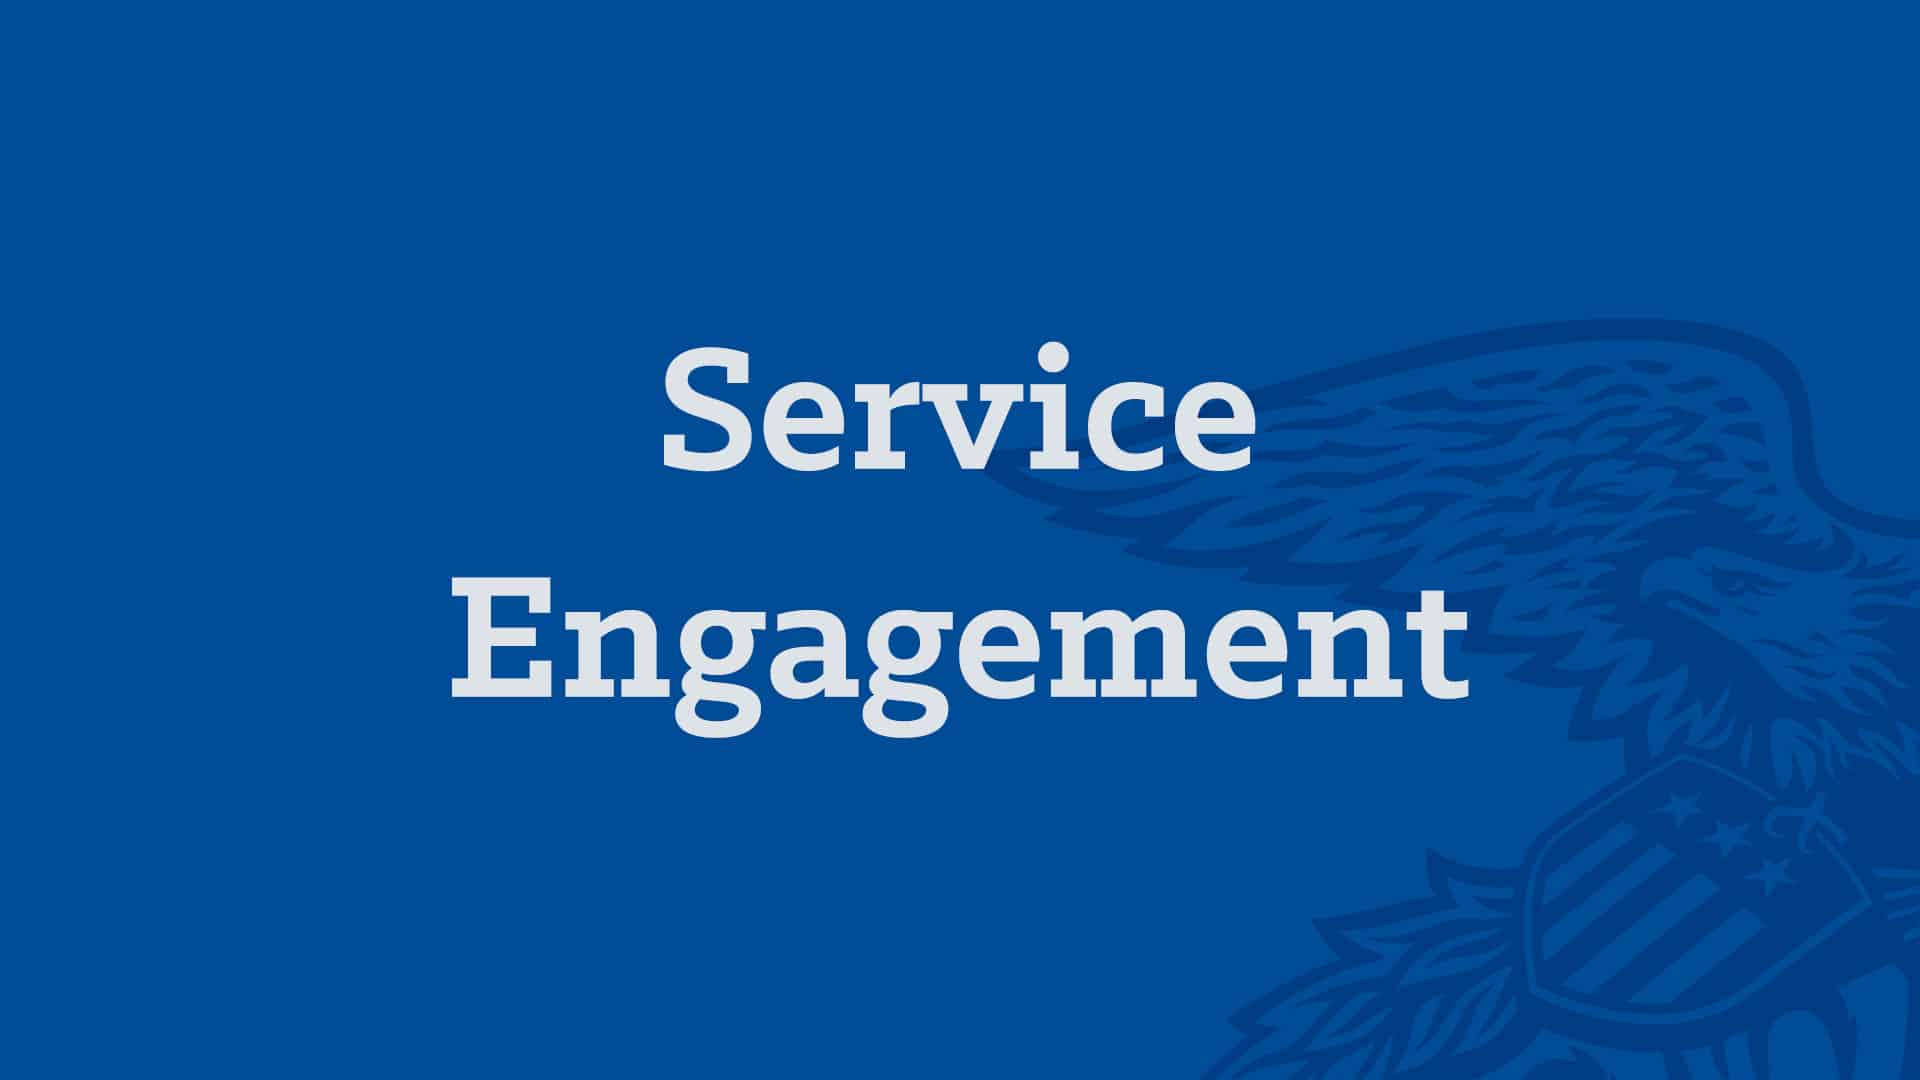 Living to Serve - Types of Service - Service Engagement